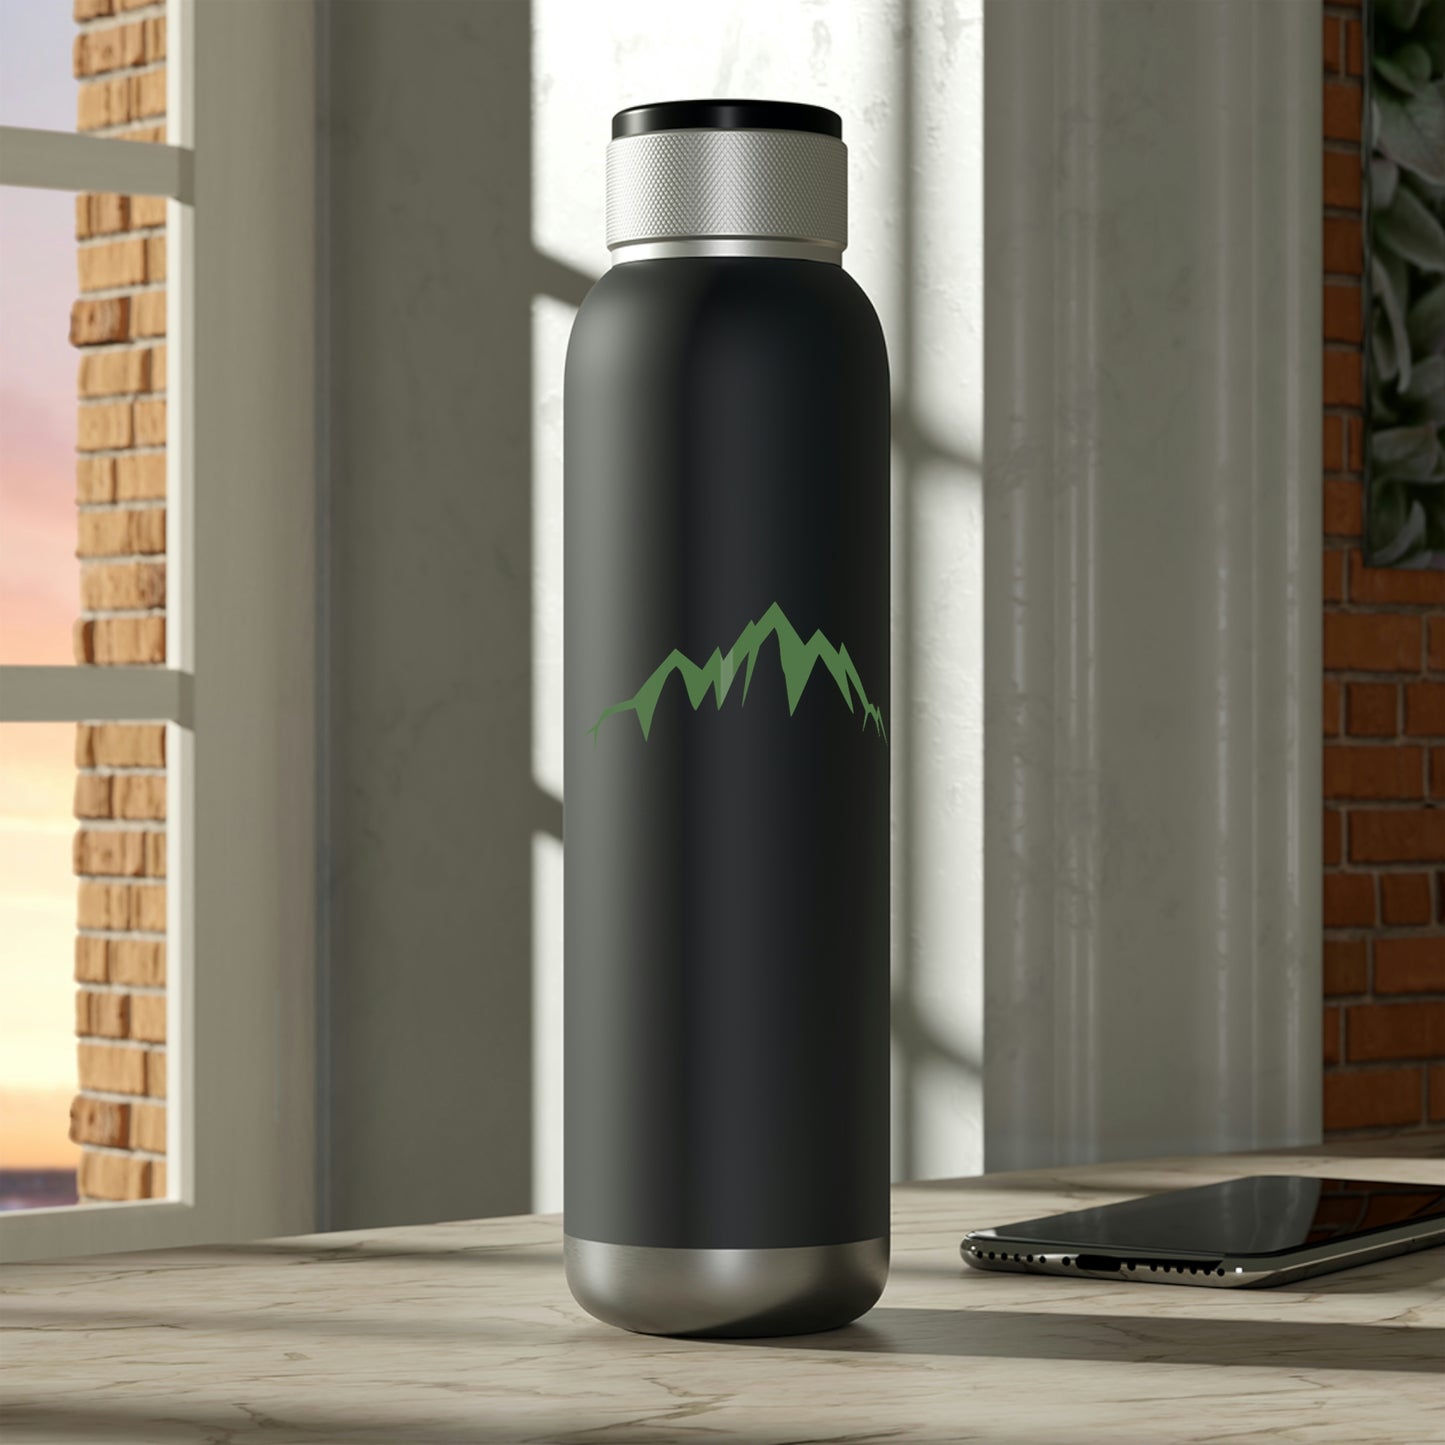 high quality hiking water bottle with speaker